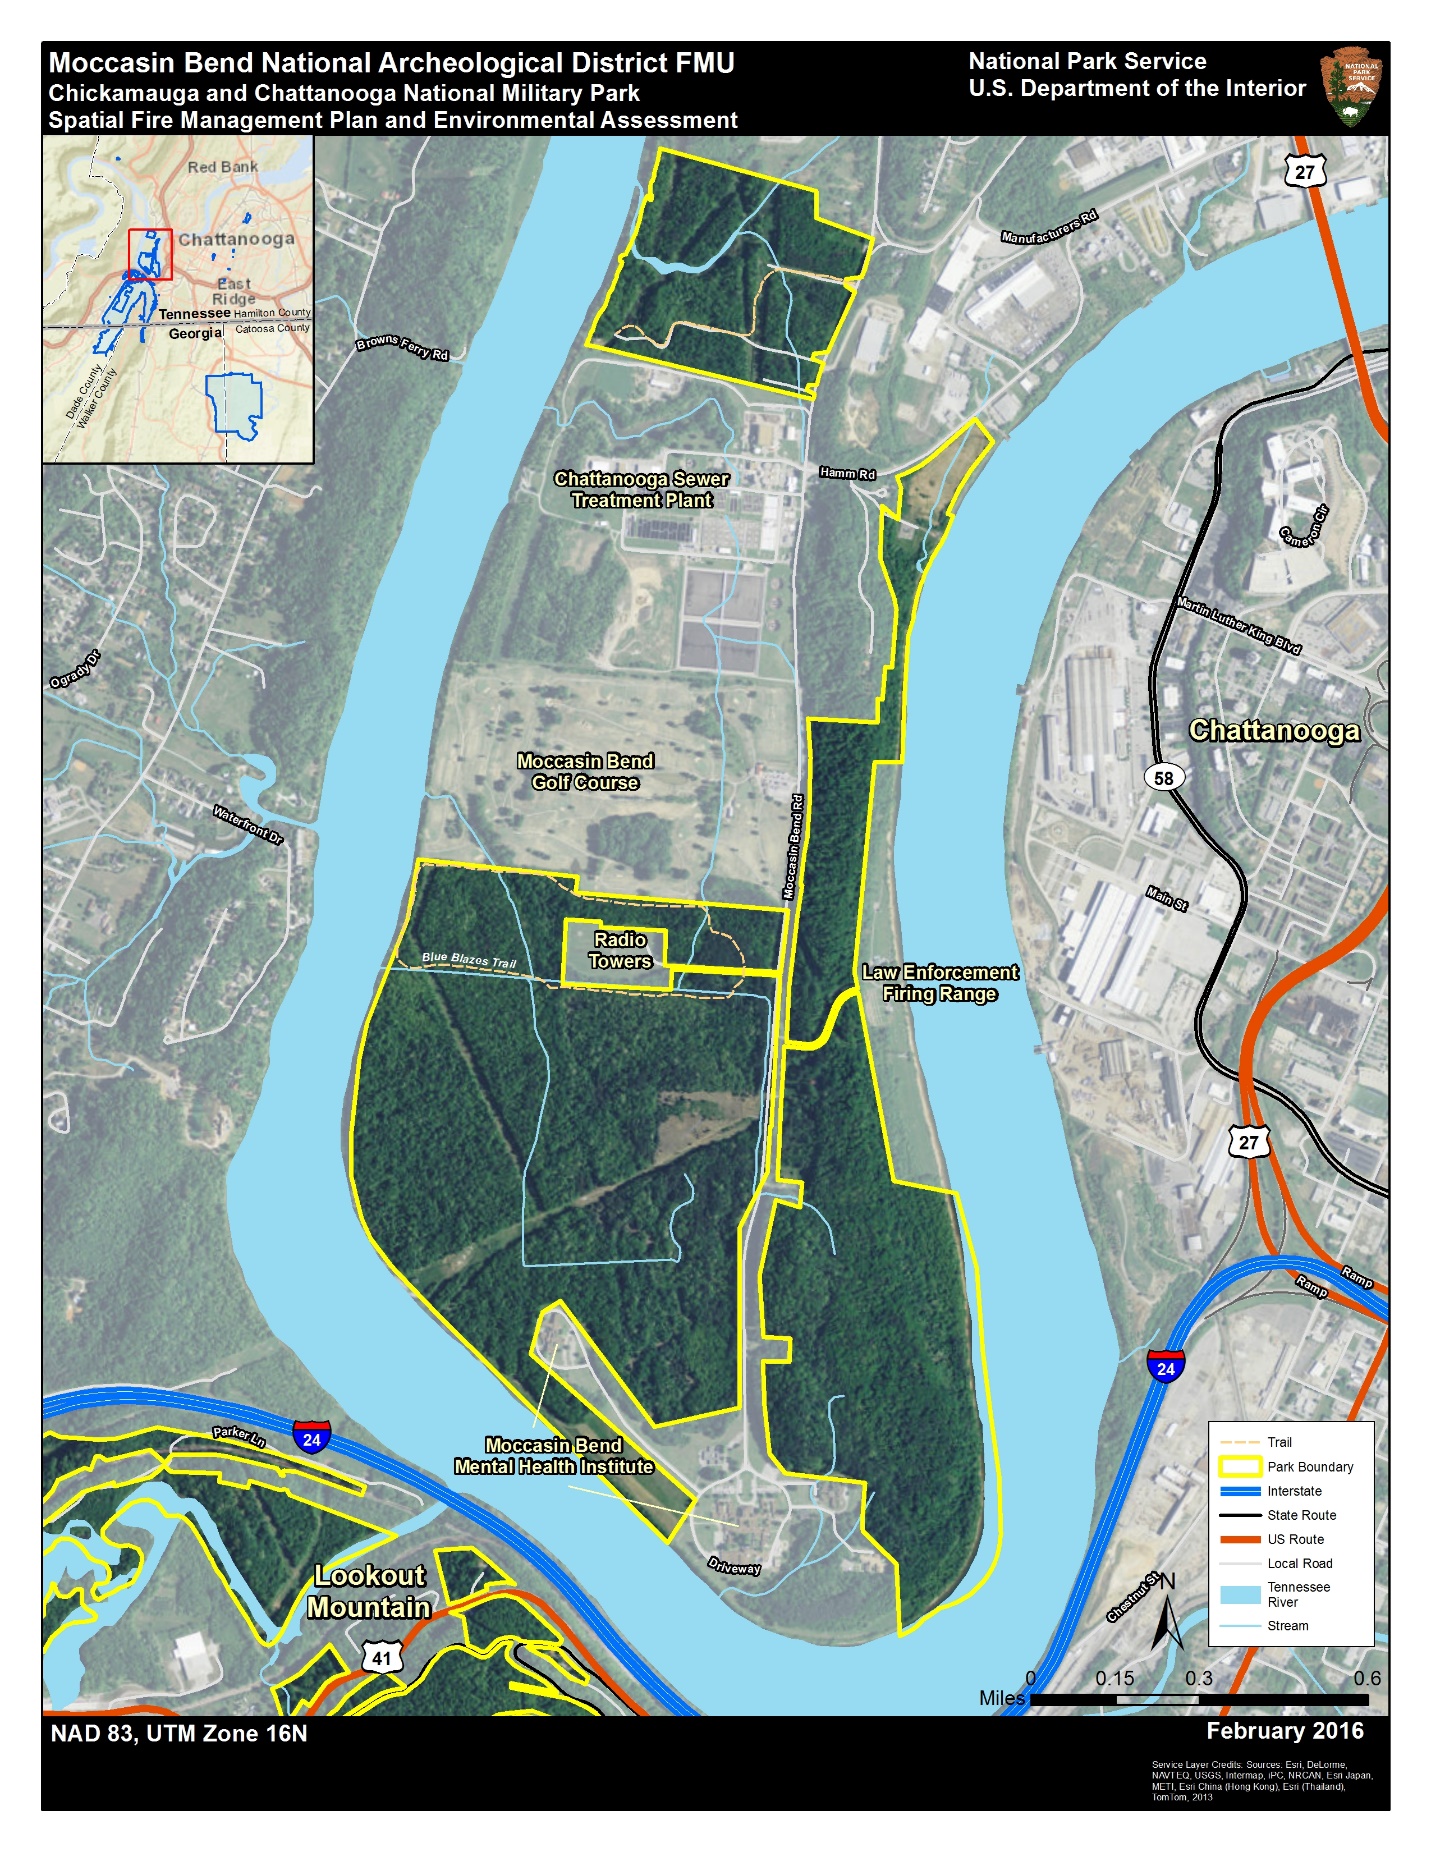 this map shows a zoomed-in view of the moccasin bend fmu. aerial photography is the base layer for the map. moccasin bend has several adjacent land uses, including a golf course, sewer treatment plant, radio towers, firing range, and hospital.